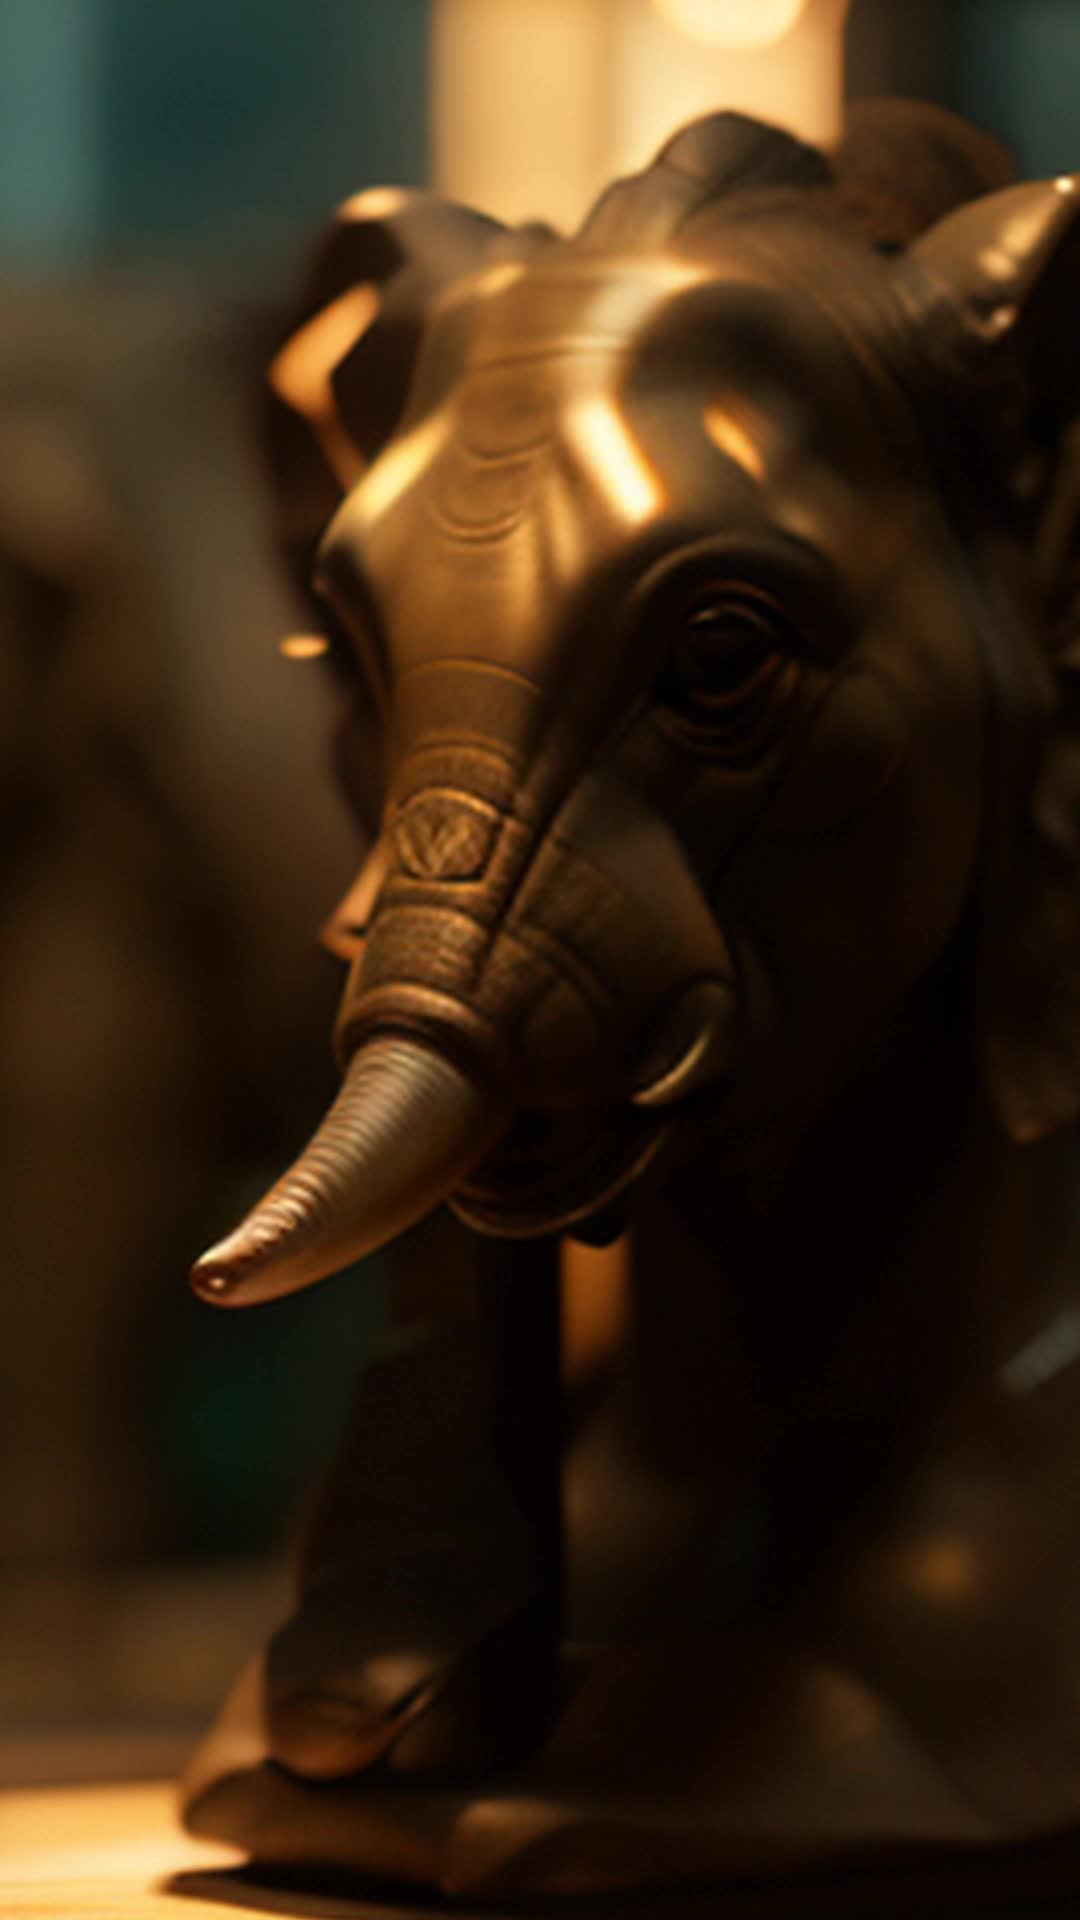 Finished clay elephant, reflection of Jamal's dedication, soft glow of accomplishment in studio, serene yet proud expression on face, sculpting tools scattered around, warmly lit environment, close-up on proud craftsmanship